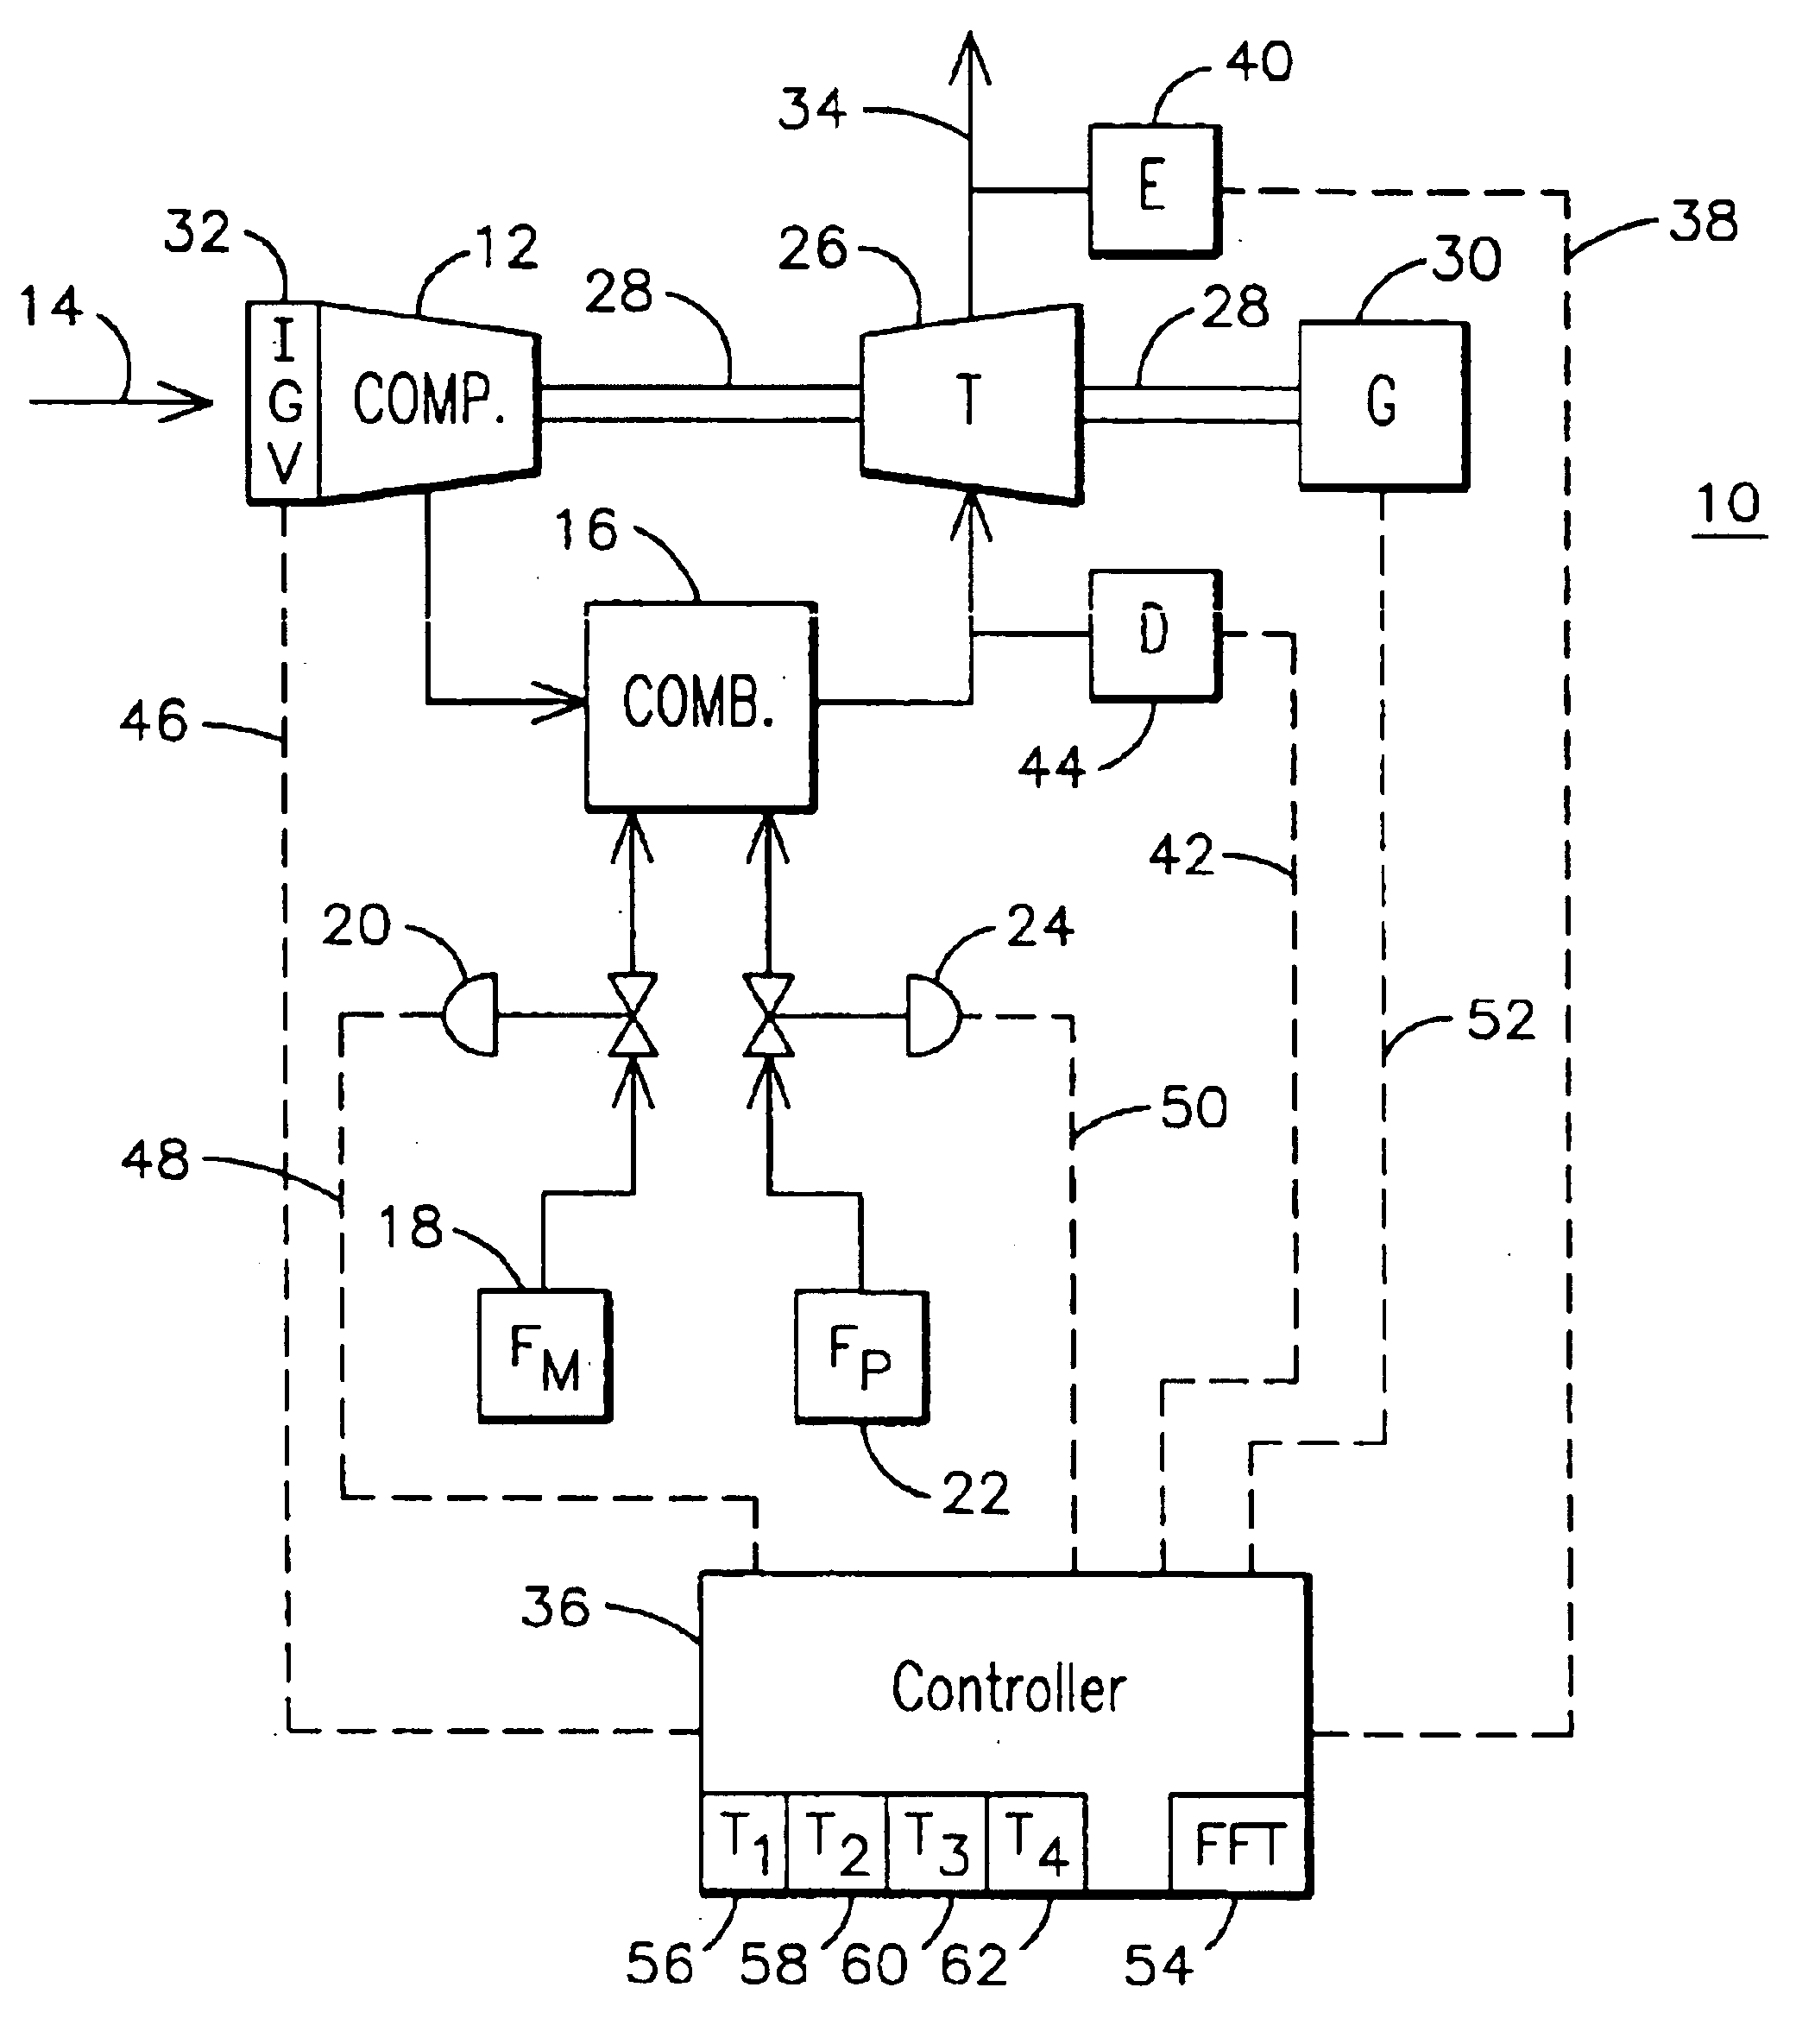 Automatic combustion control for a gas turbine